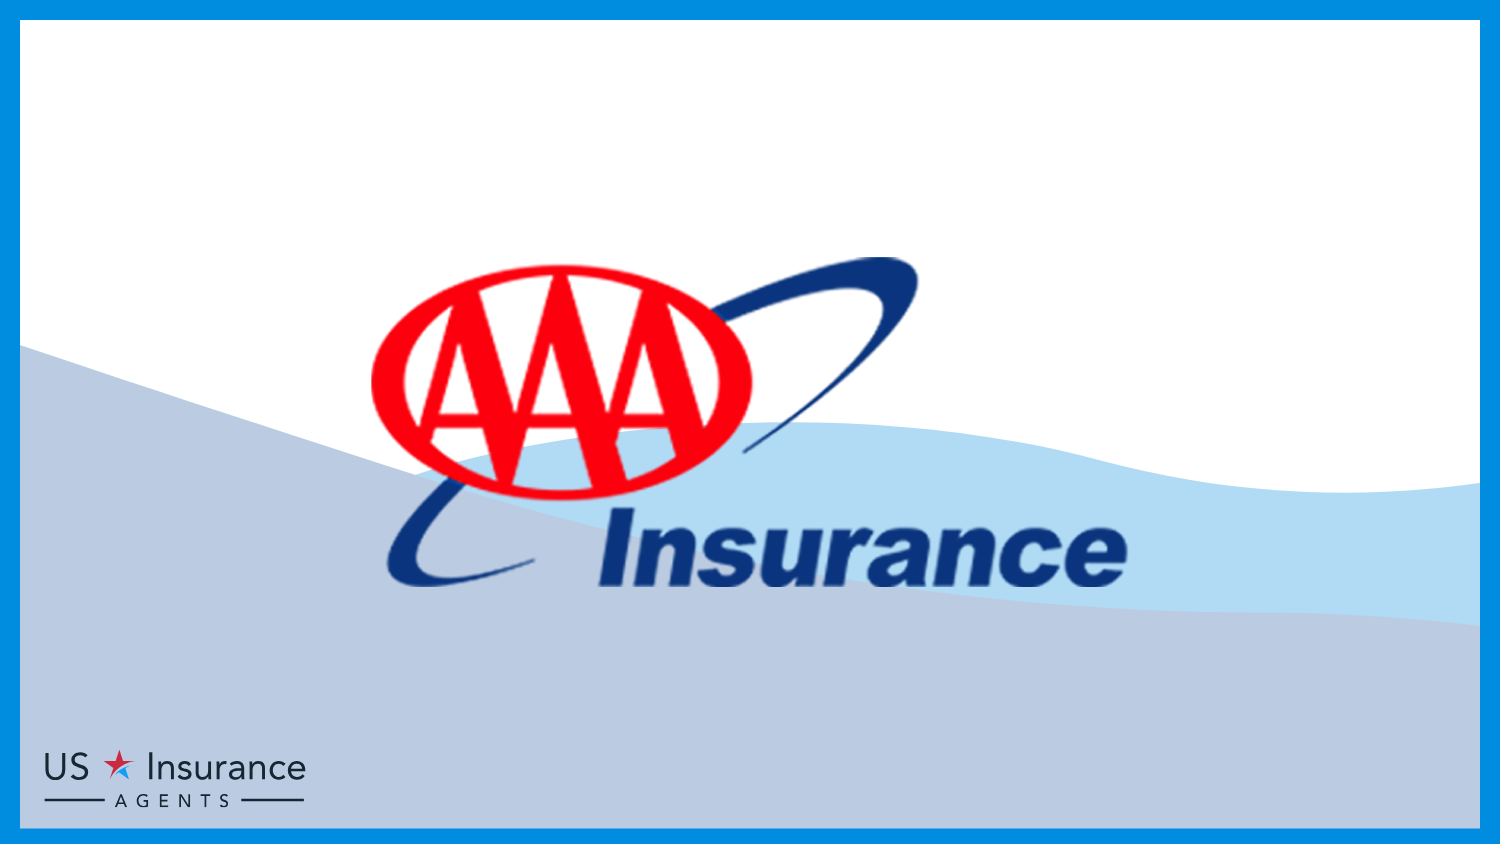 AAA: Best Business Insurance for Country Clubs